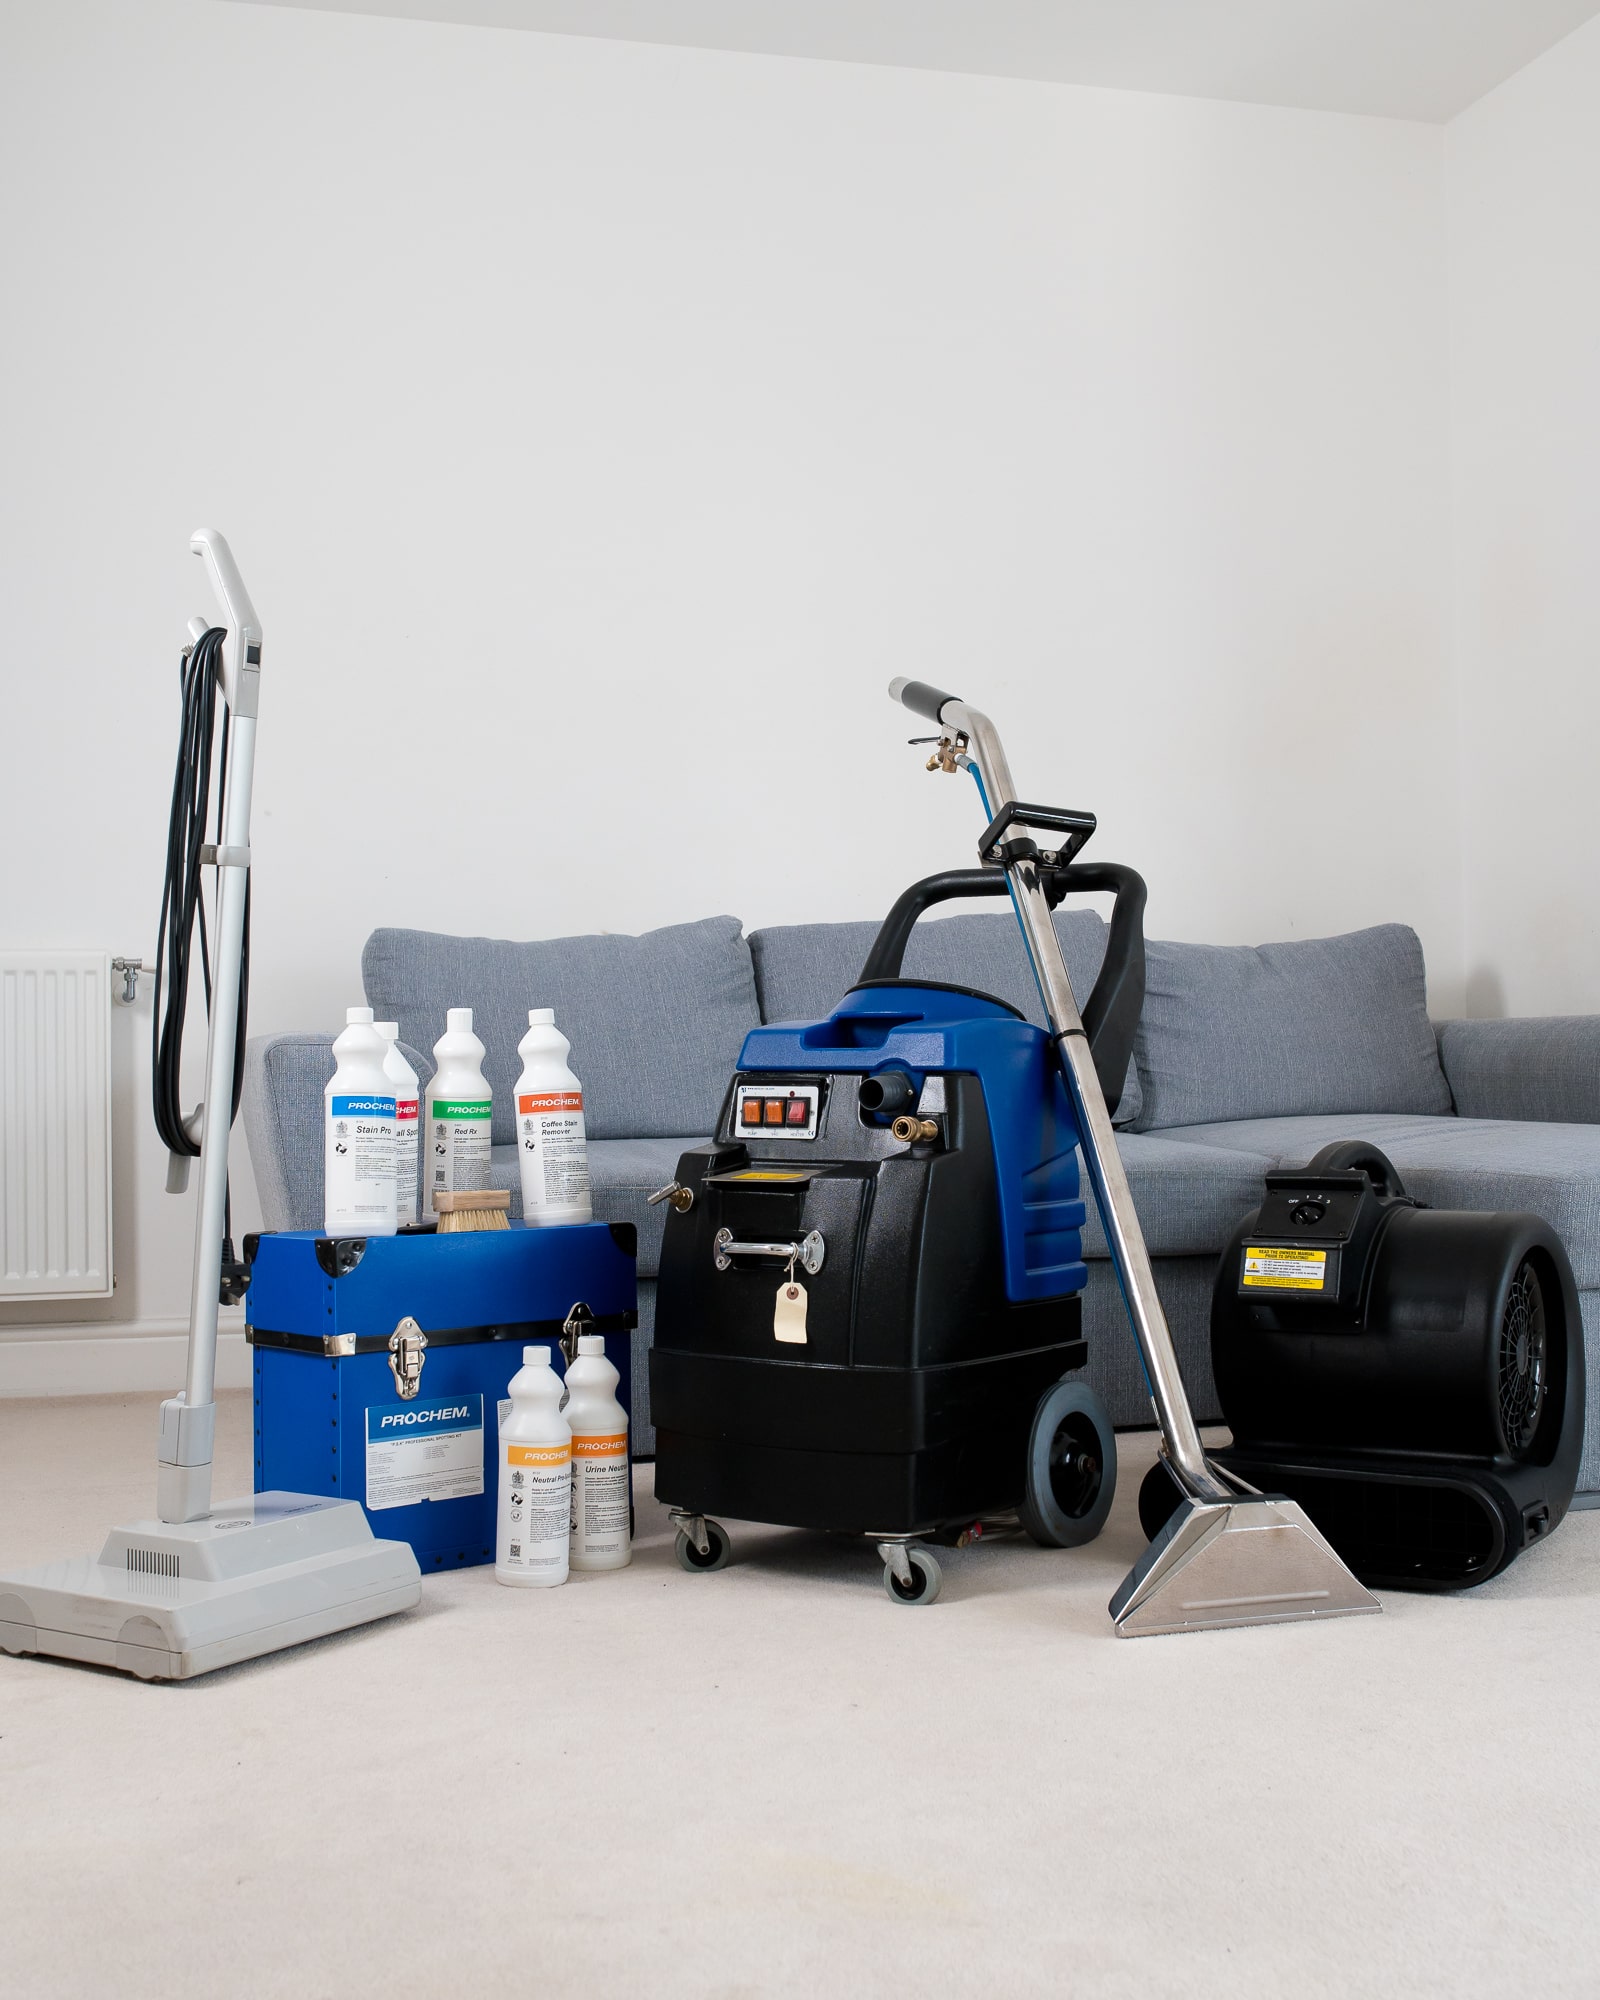 upholstery cleaning equipment